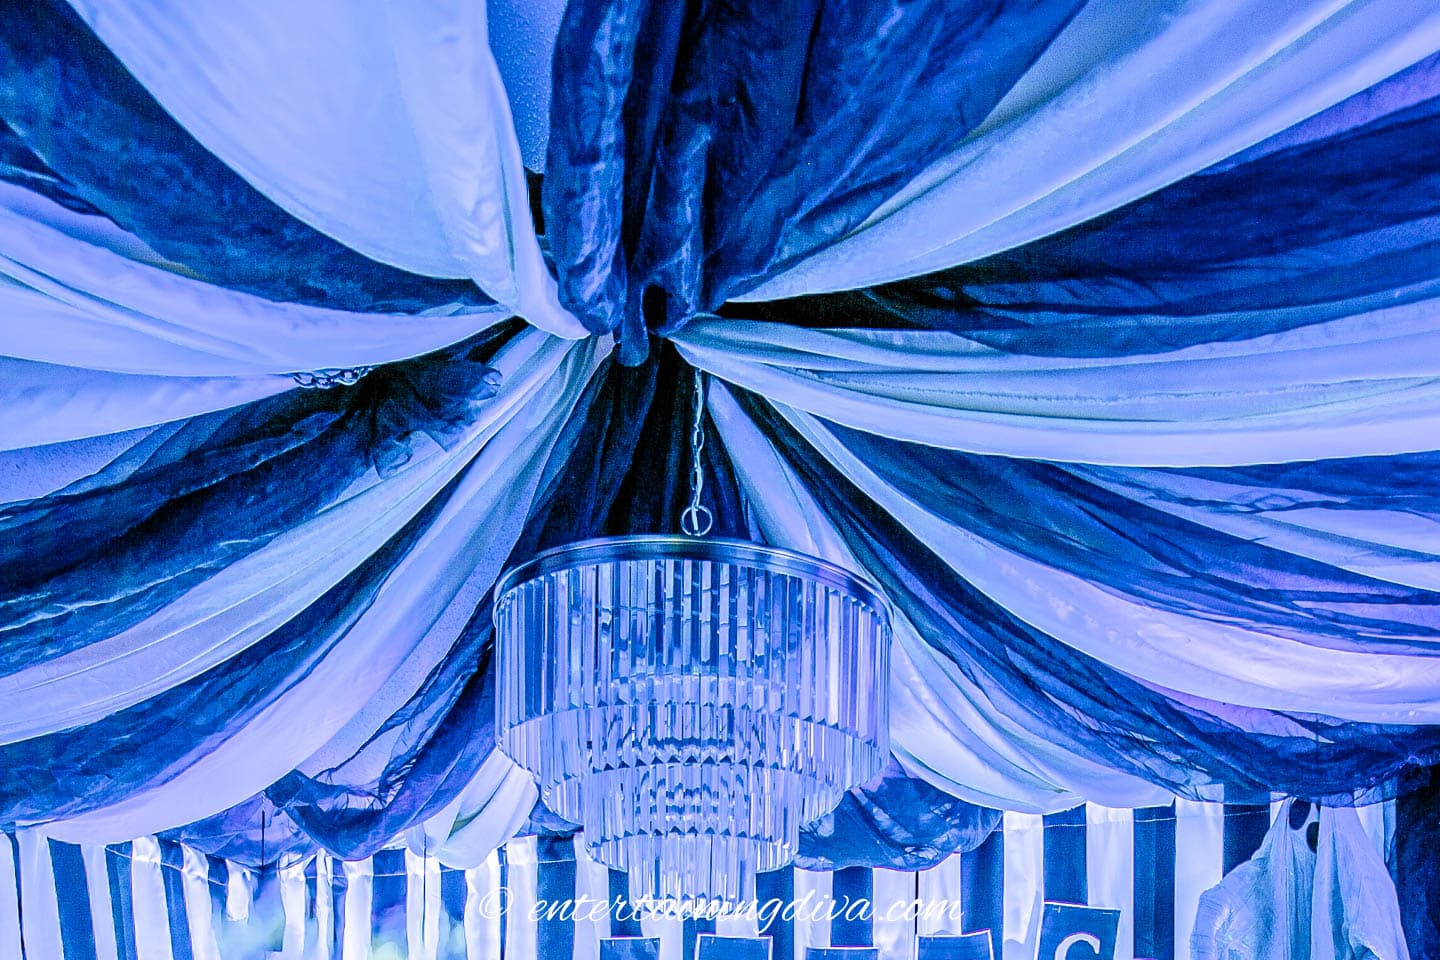 A black and white fabric tent hung from the ceiling with a chandelier.